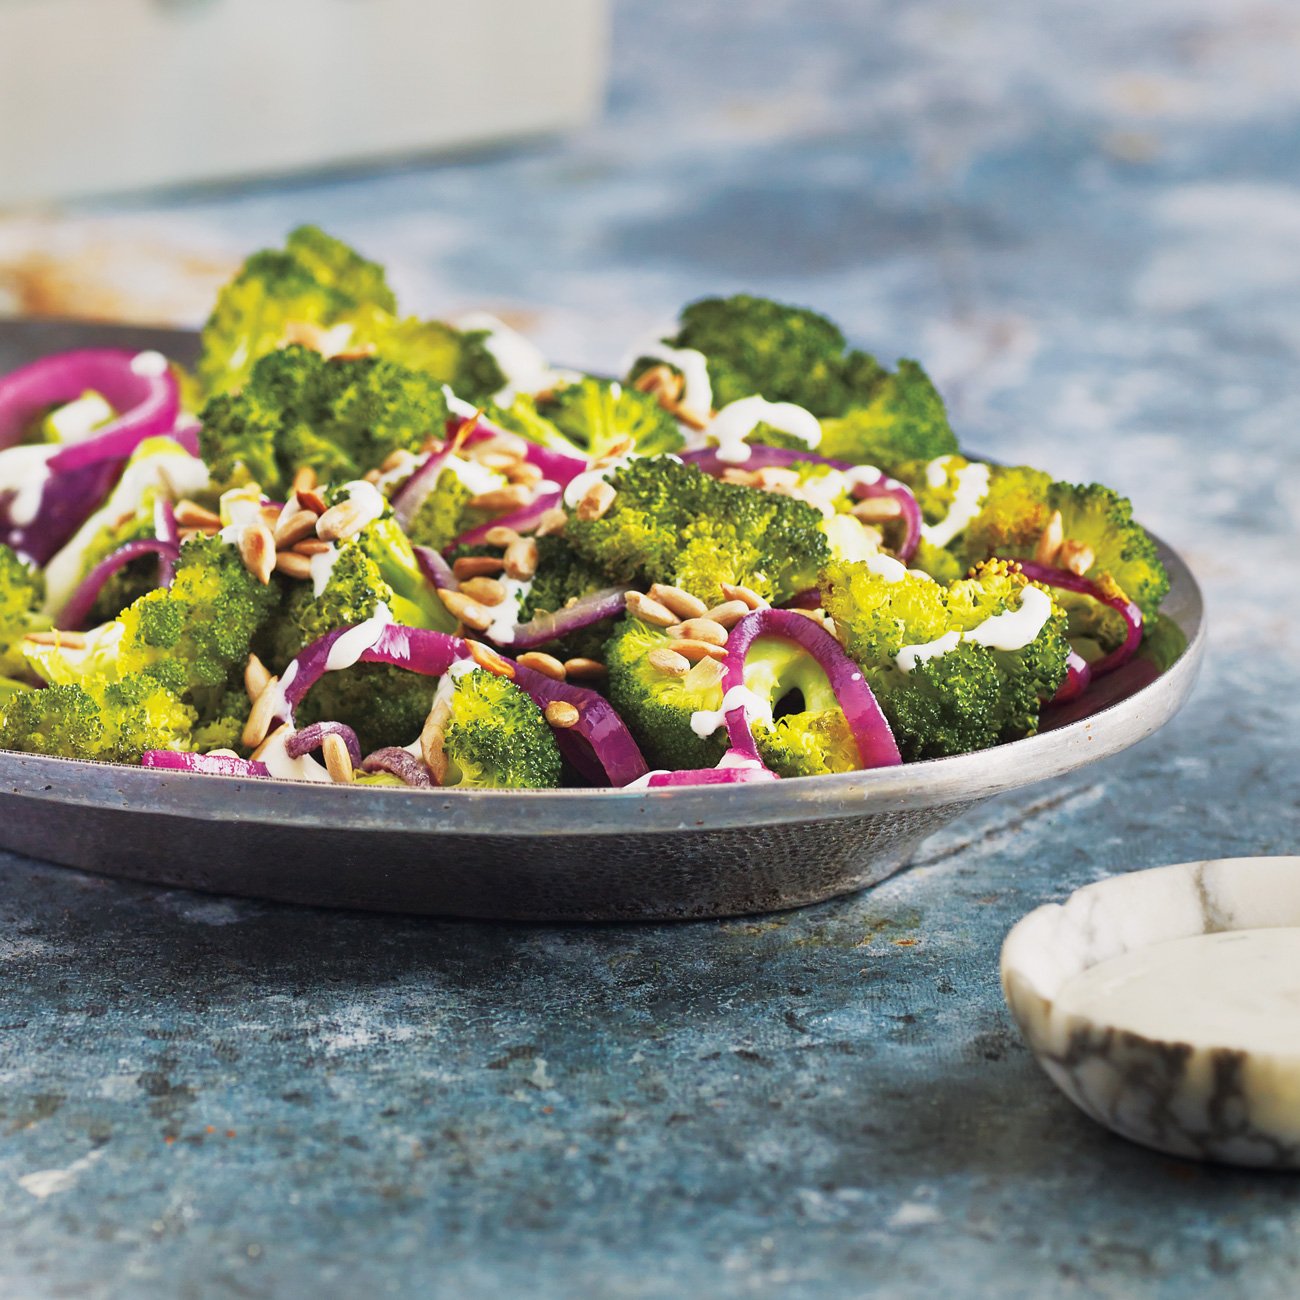 Roasted Broccoli & Red Onion Salad Recipe from